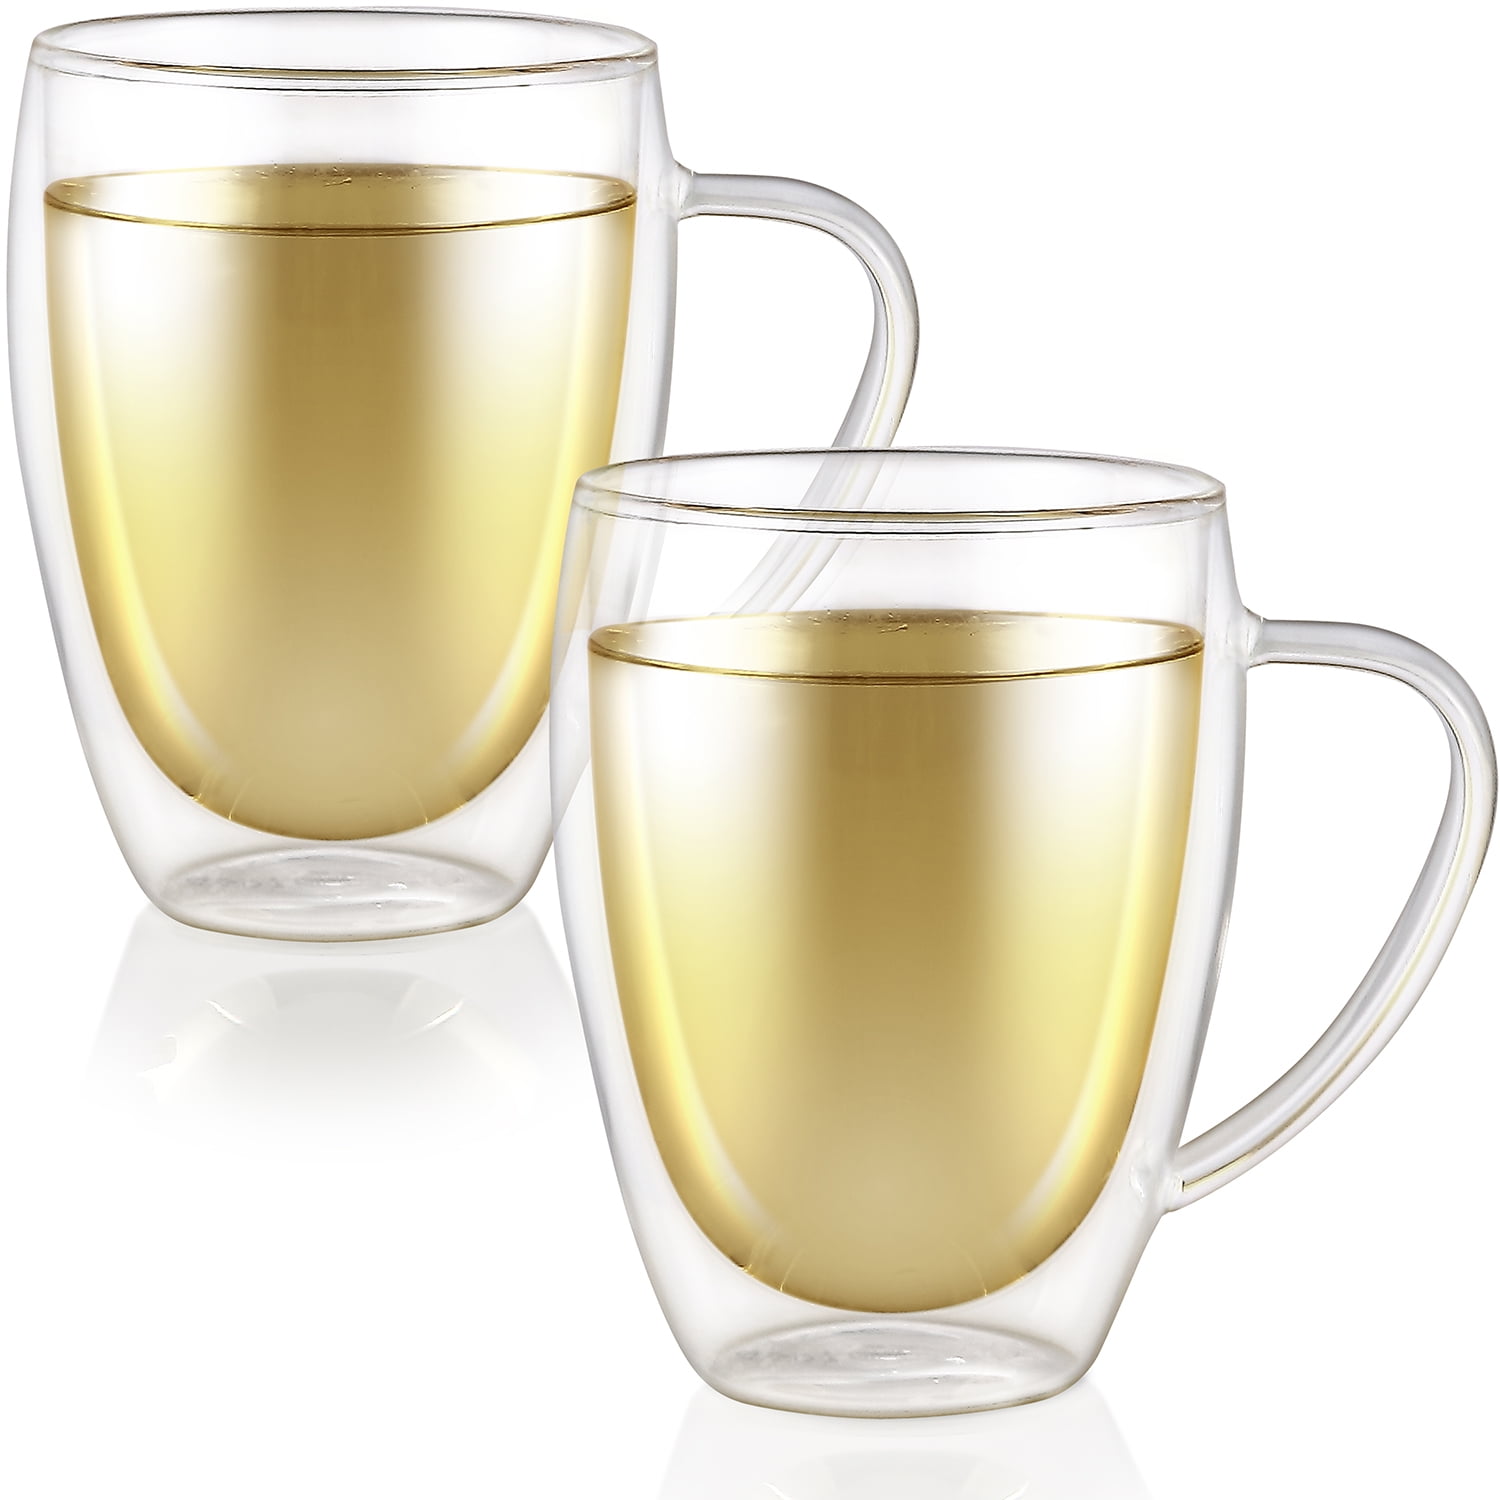 Lemonsoda Double Wall Glass Coffee Mugs Cups (12 fl. oz. / 350ml) Espresso or Tea Glasses, Insulated Drinking Glasses | Hot and Cold Beverages | Set